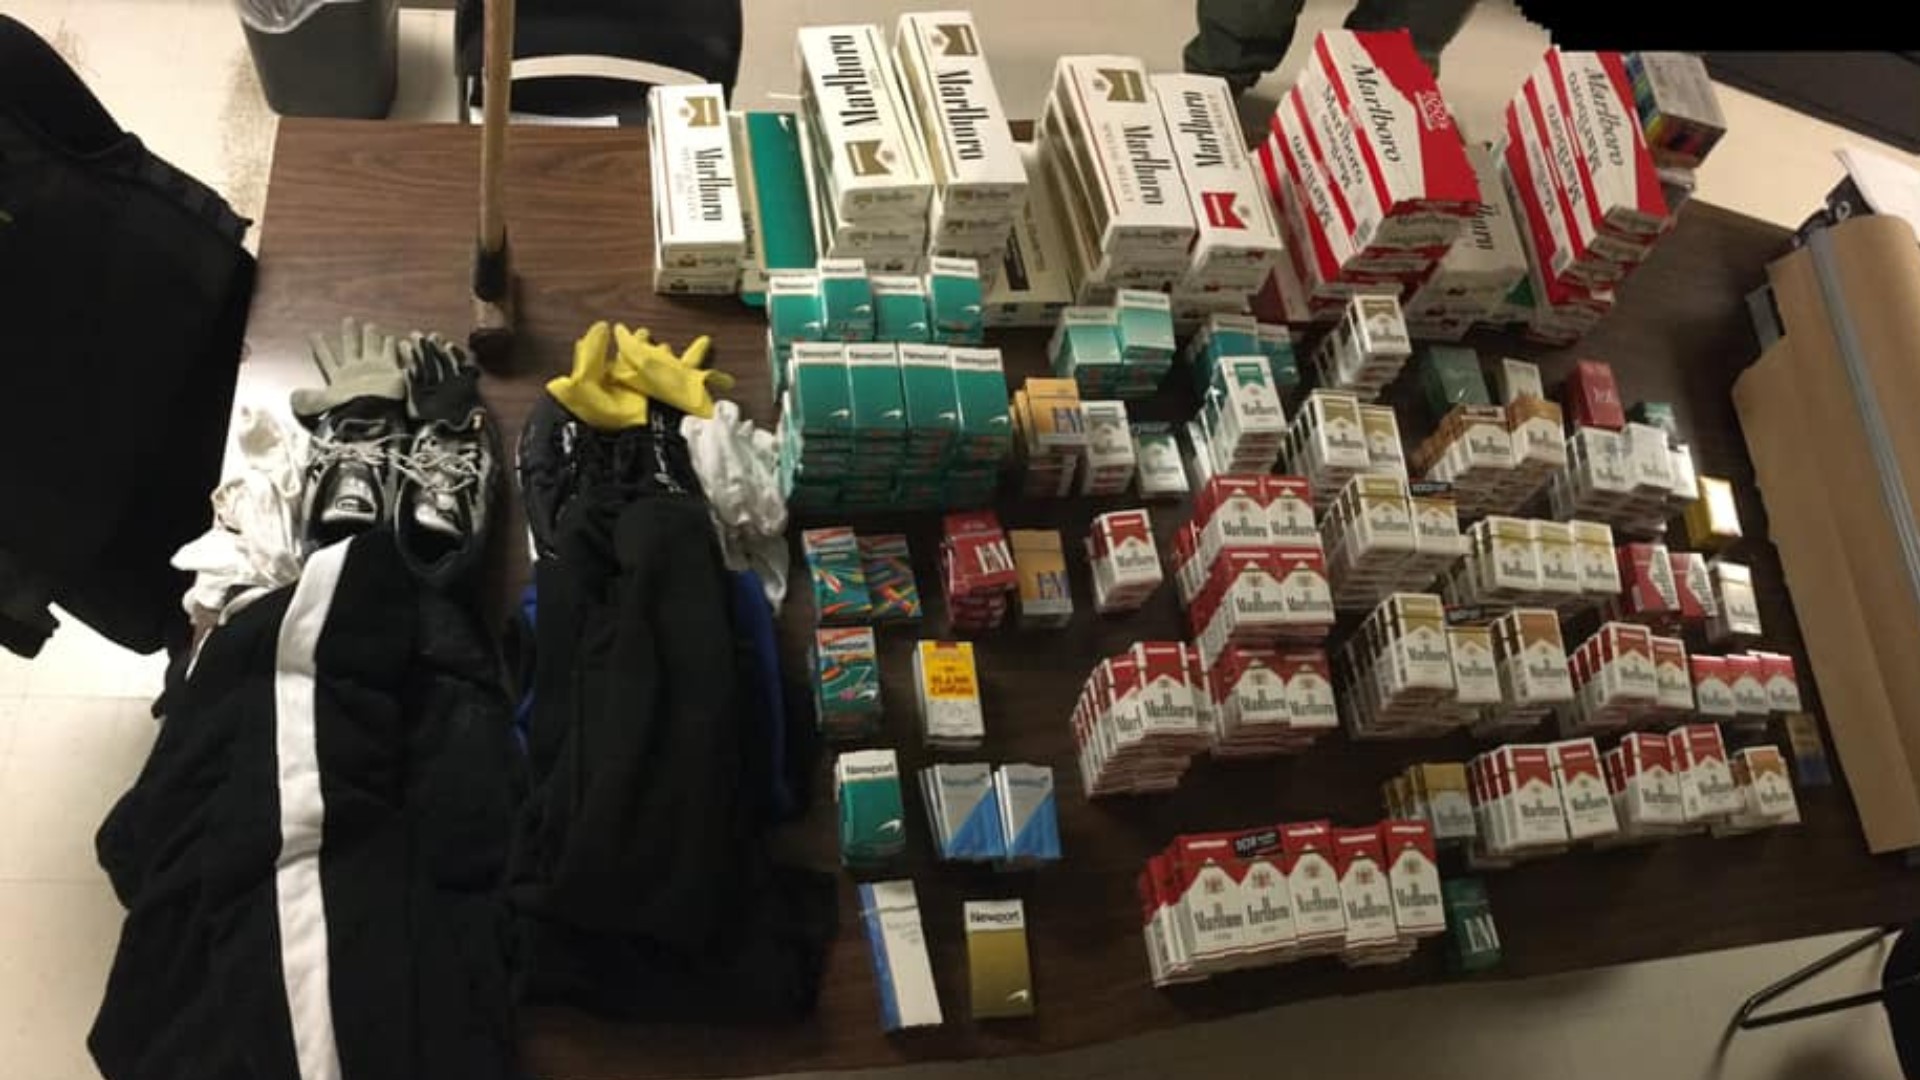 The two men were arrested Saturday after police found two trash bags filled with packs of cigarettes in a vehicle that was pulled over for speeding.